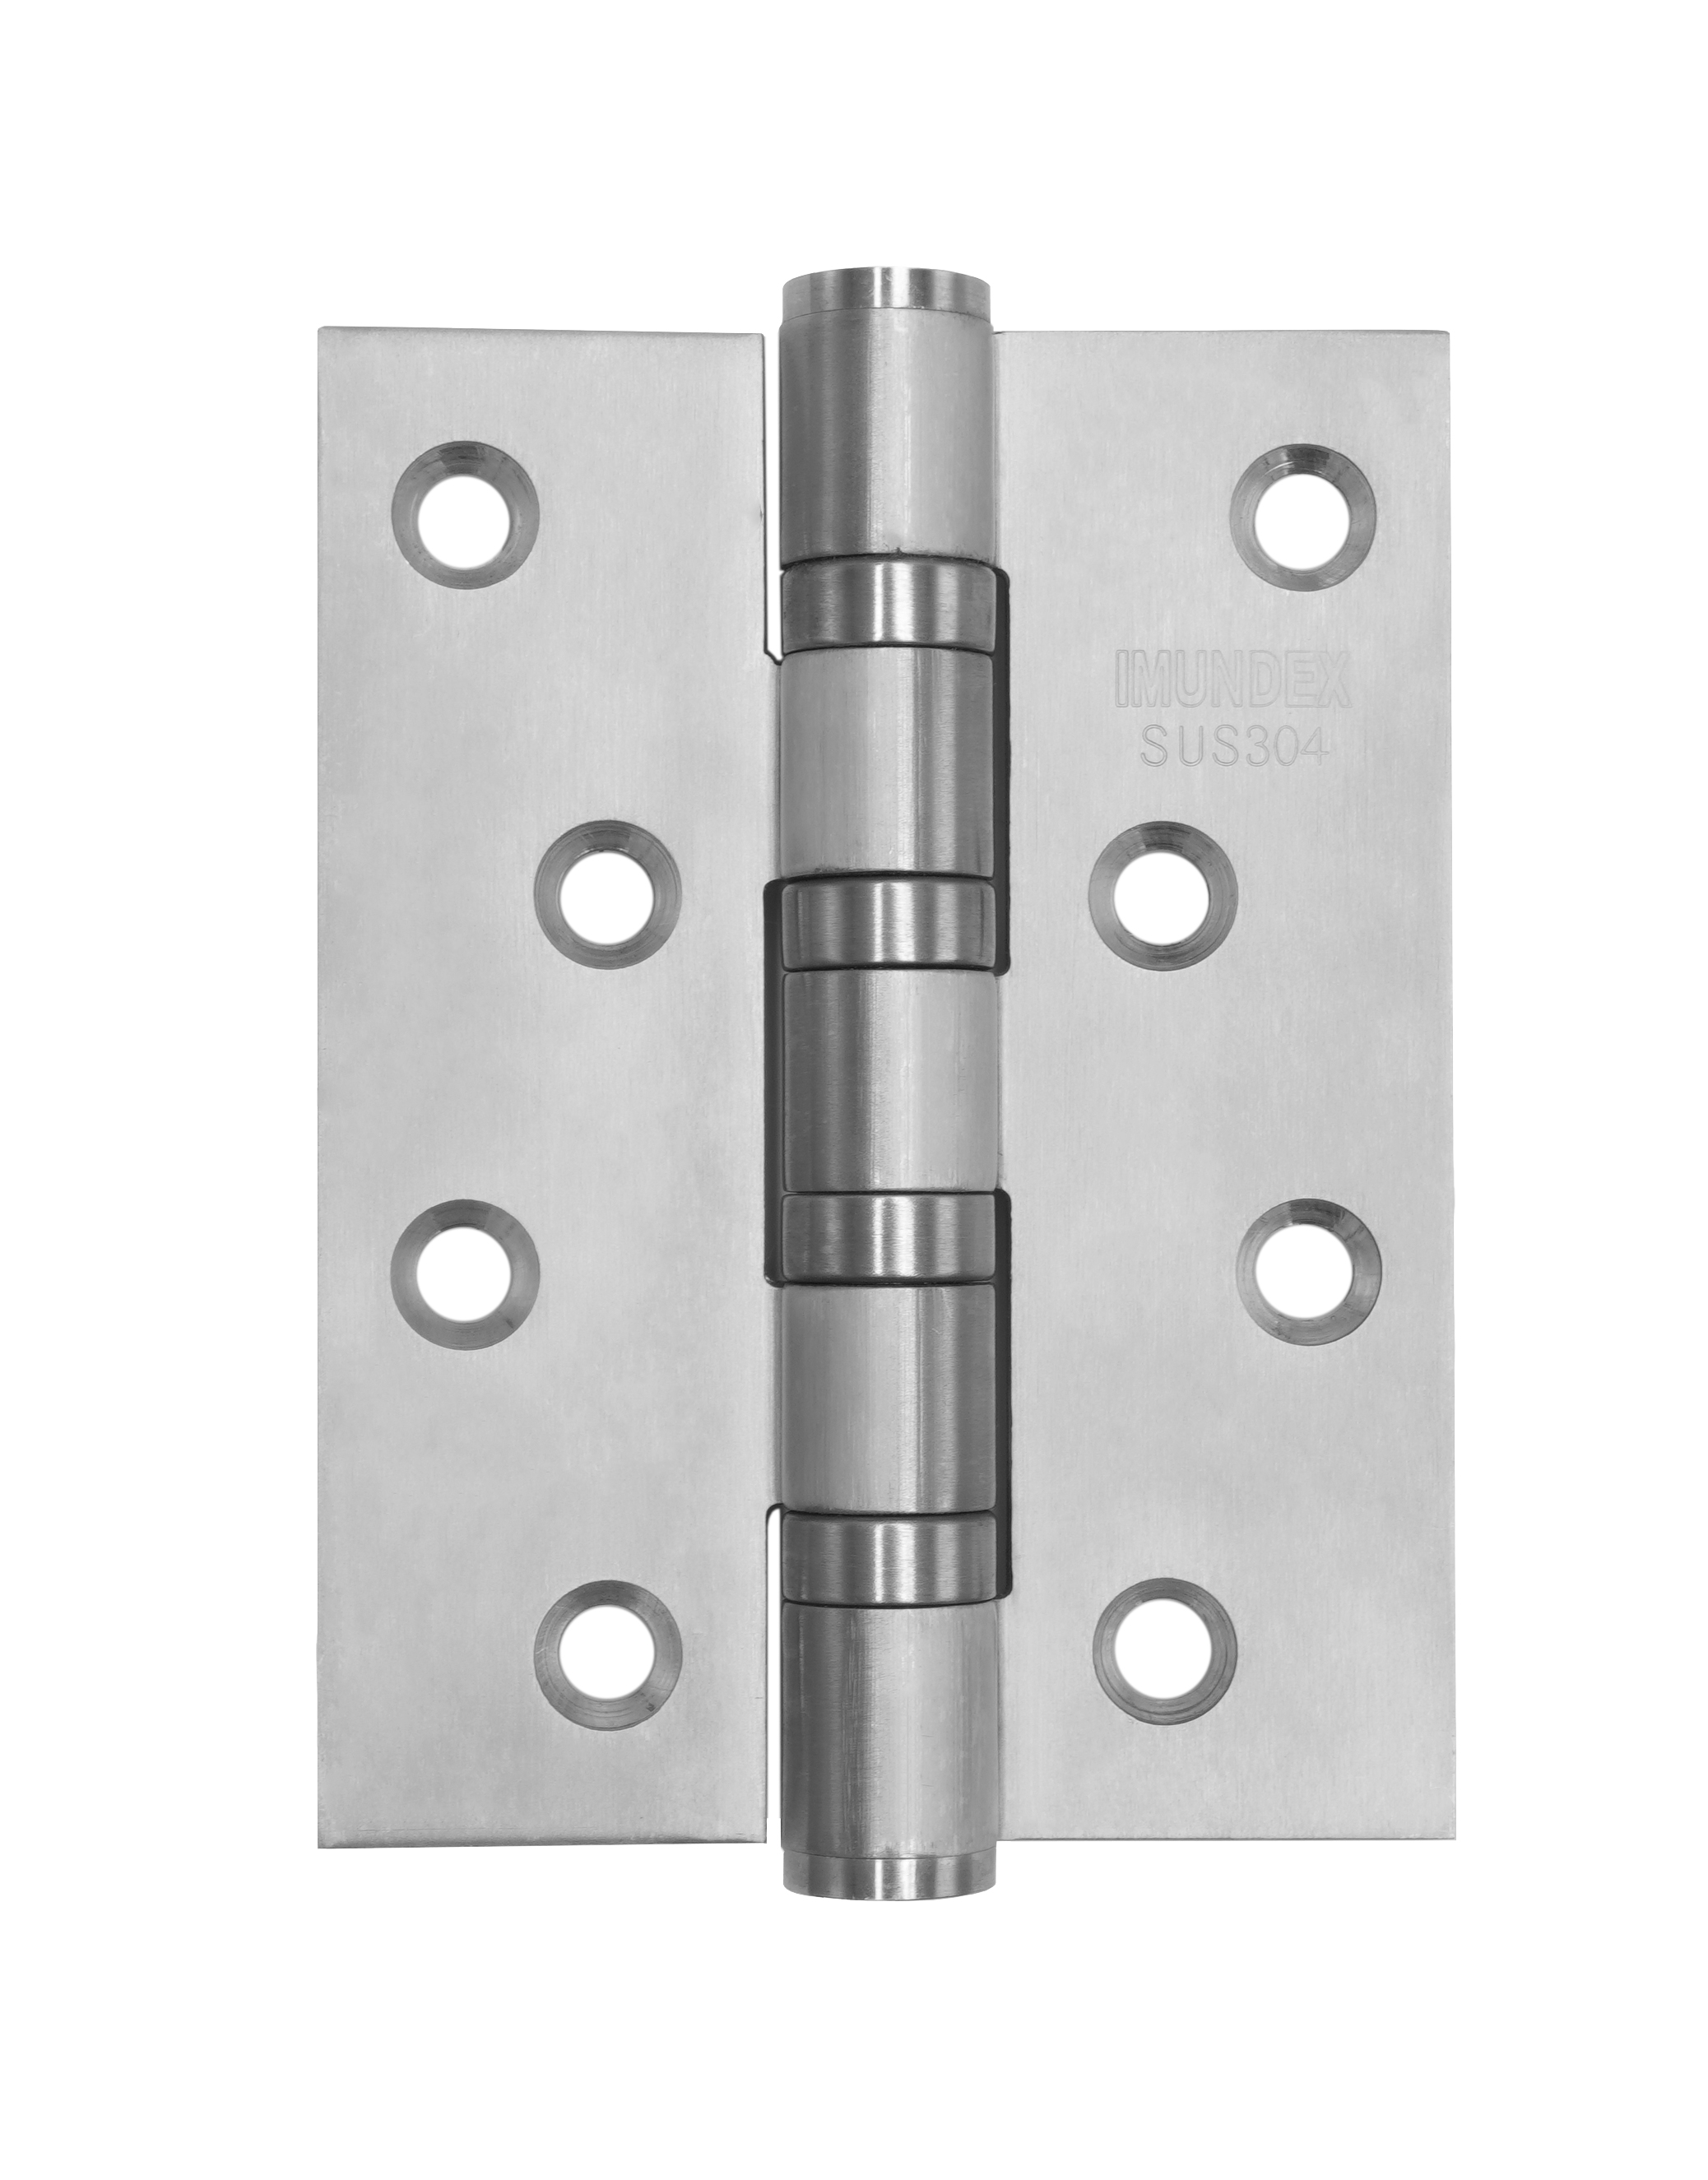 Ball bearing hinges with large size - 4BB - Inox 304